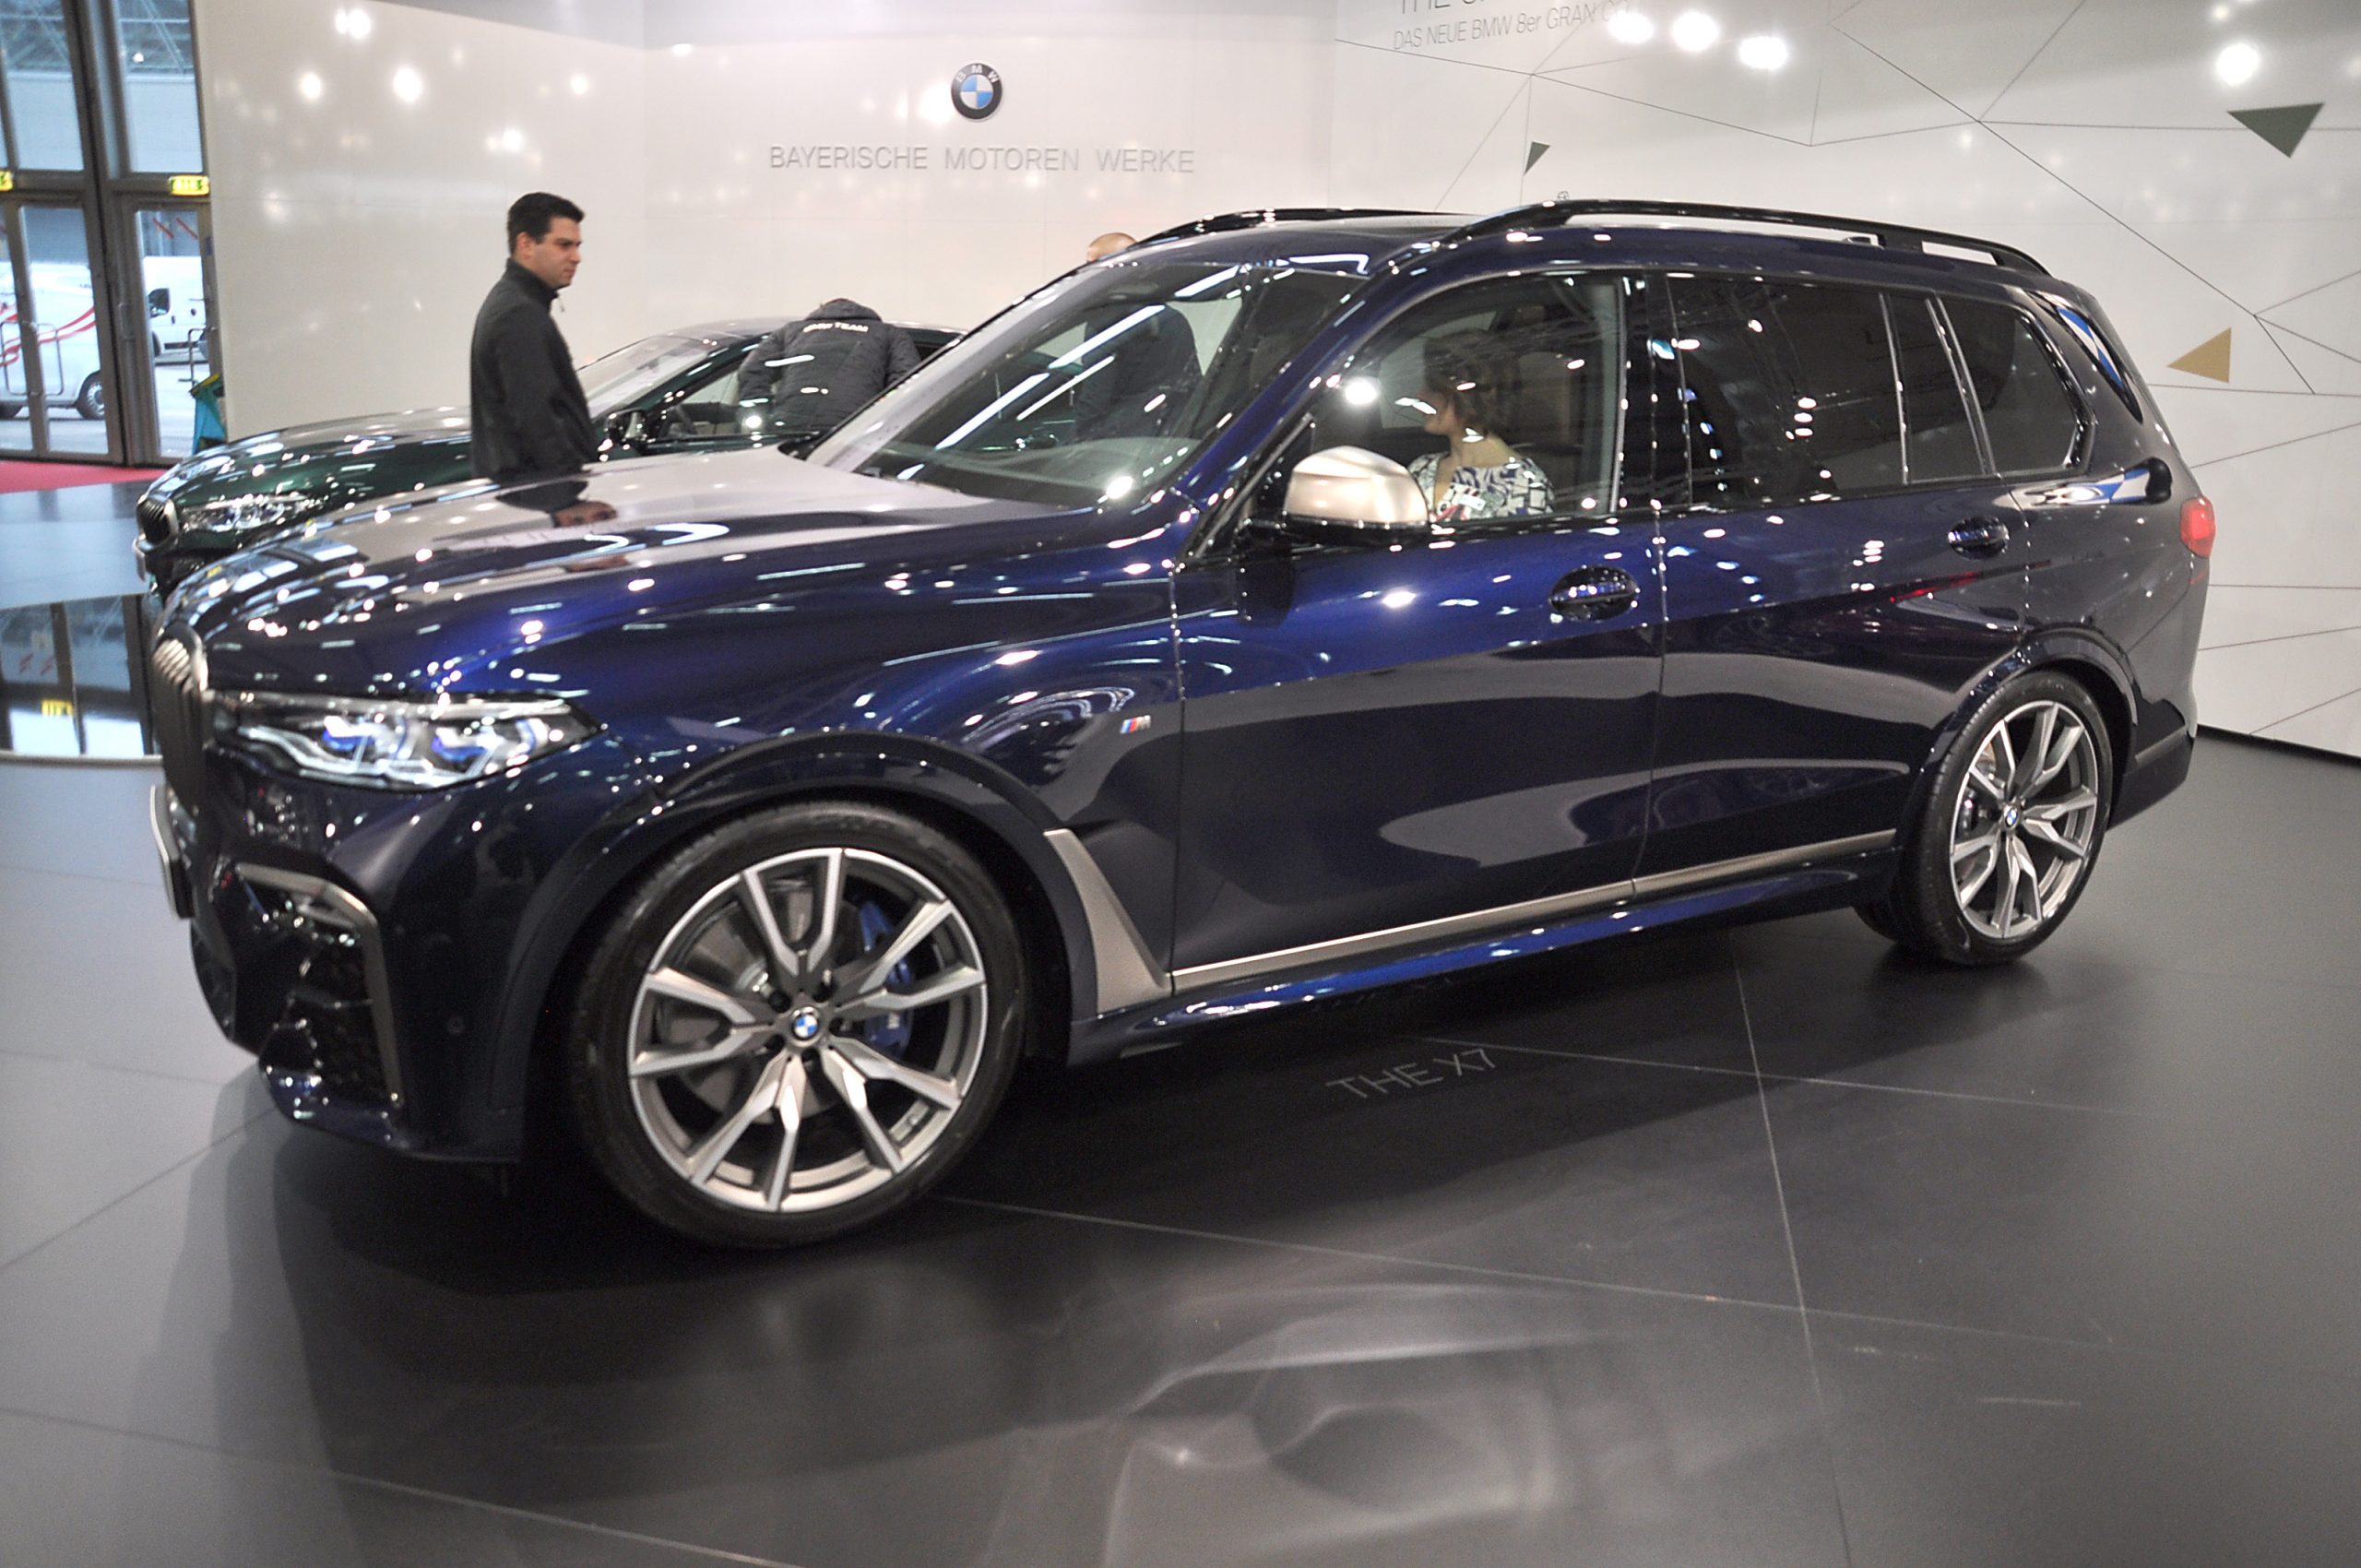 A BMW X7 on display at a car show